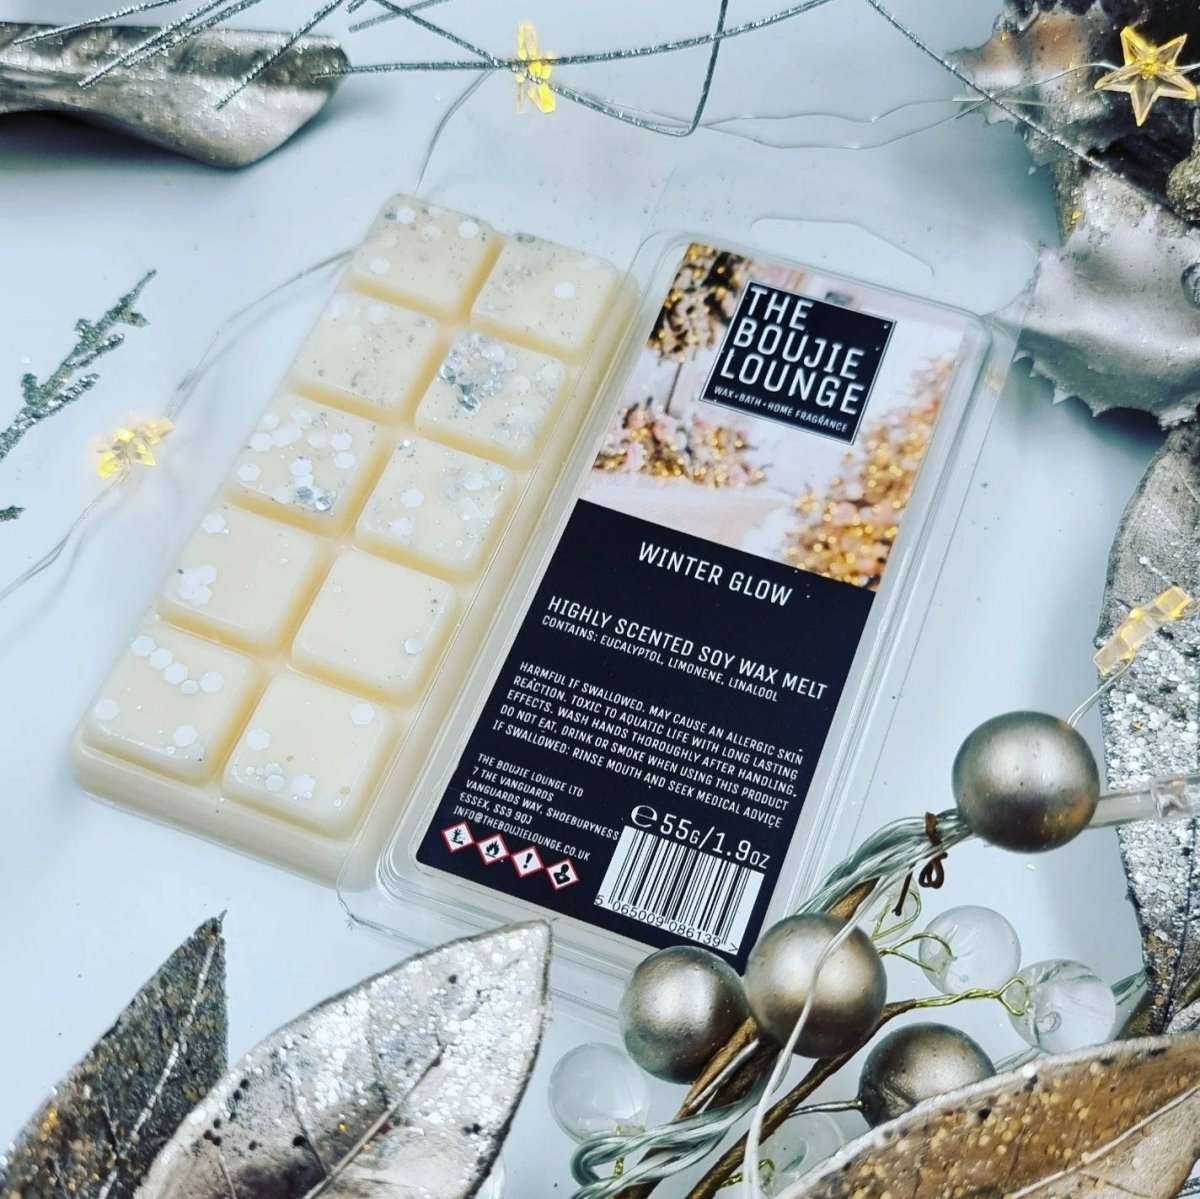 Winter Glow Scented Wax Melt by The Boujie Lounge